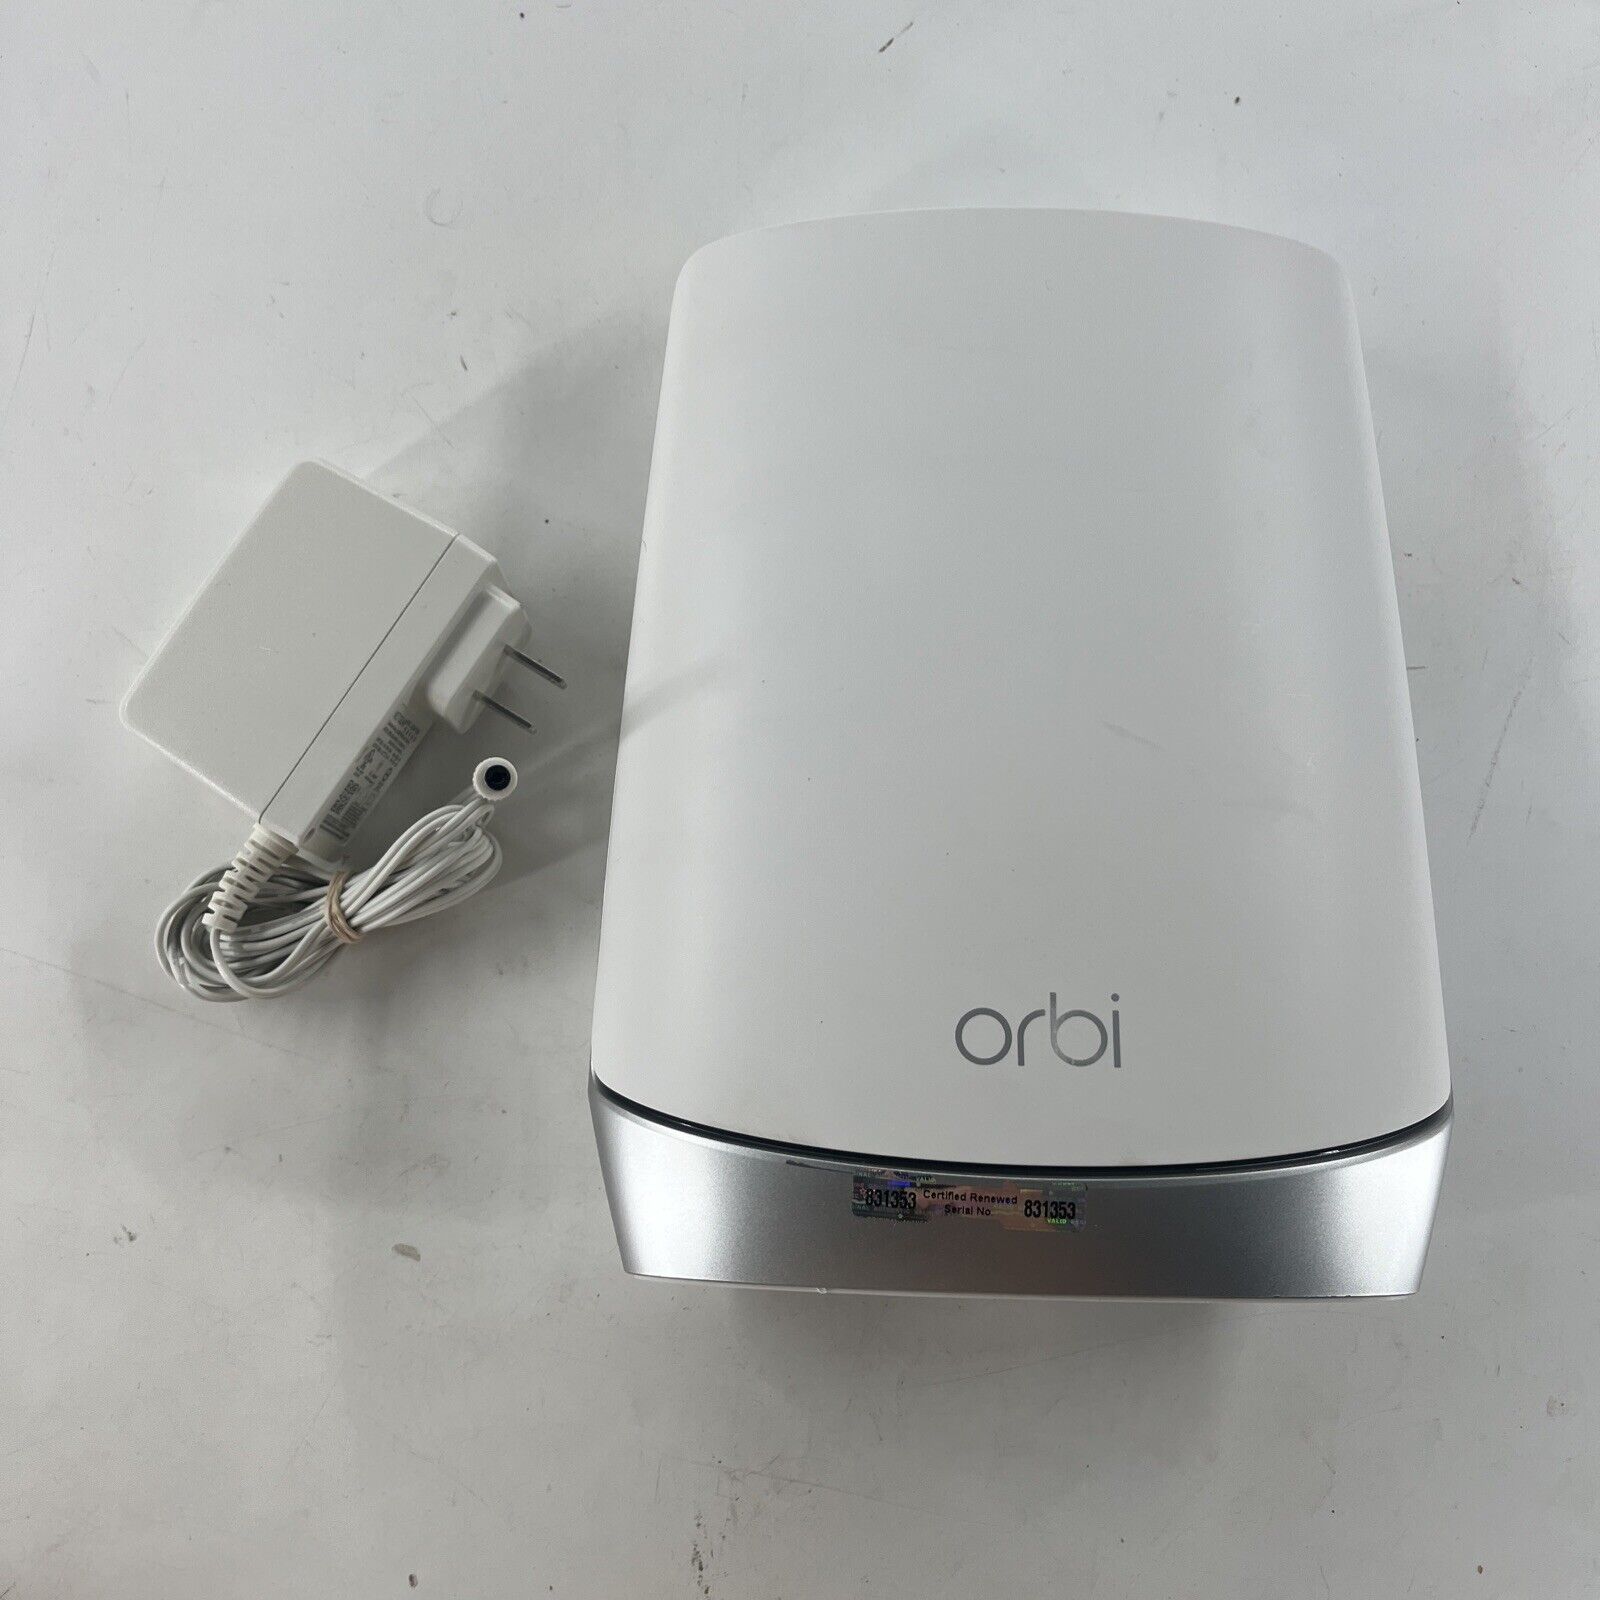 NETGEAR Orbi RBR750 Router AX4200 Mesh Network with WiFi 6 ~ Very Good Condition